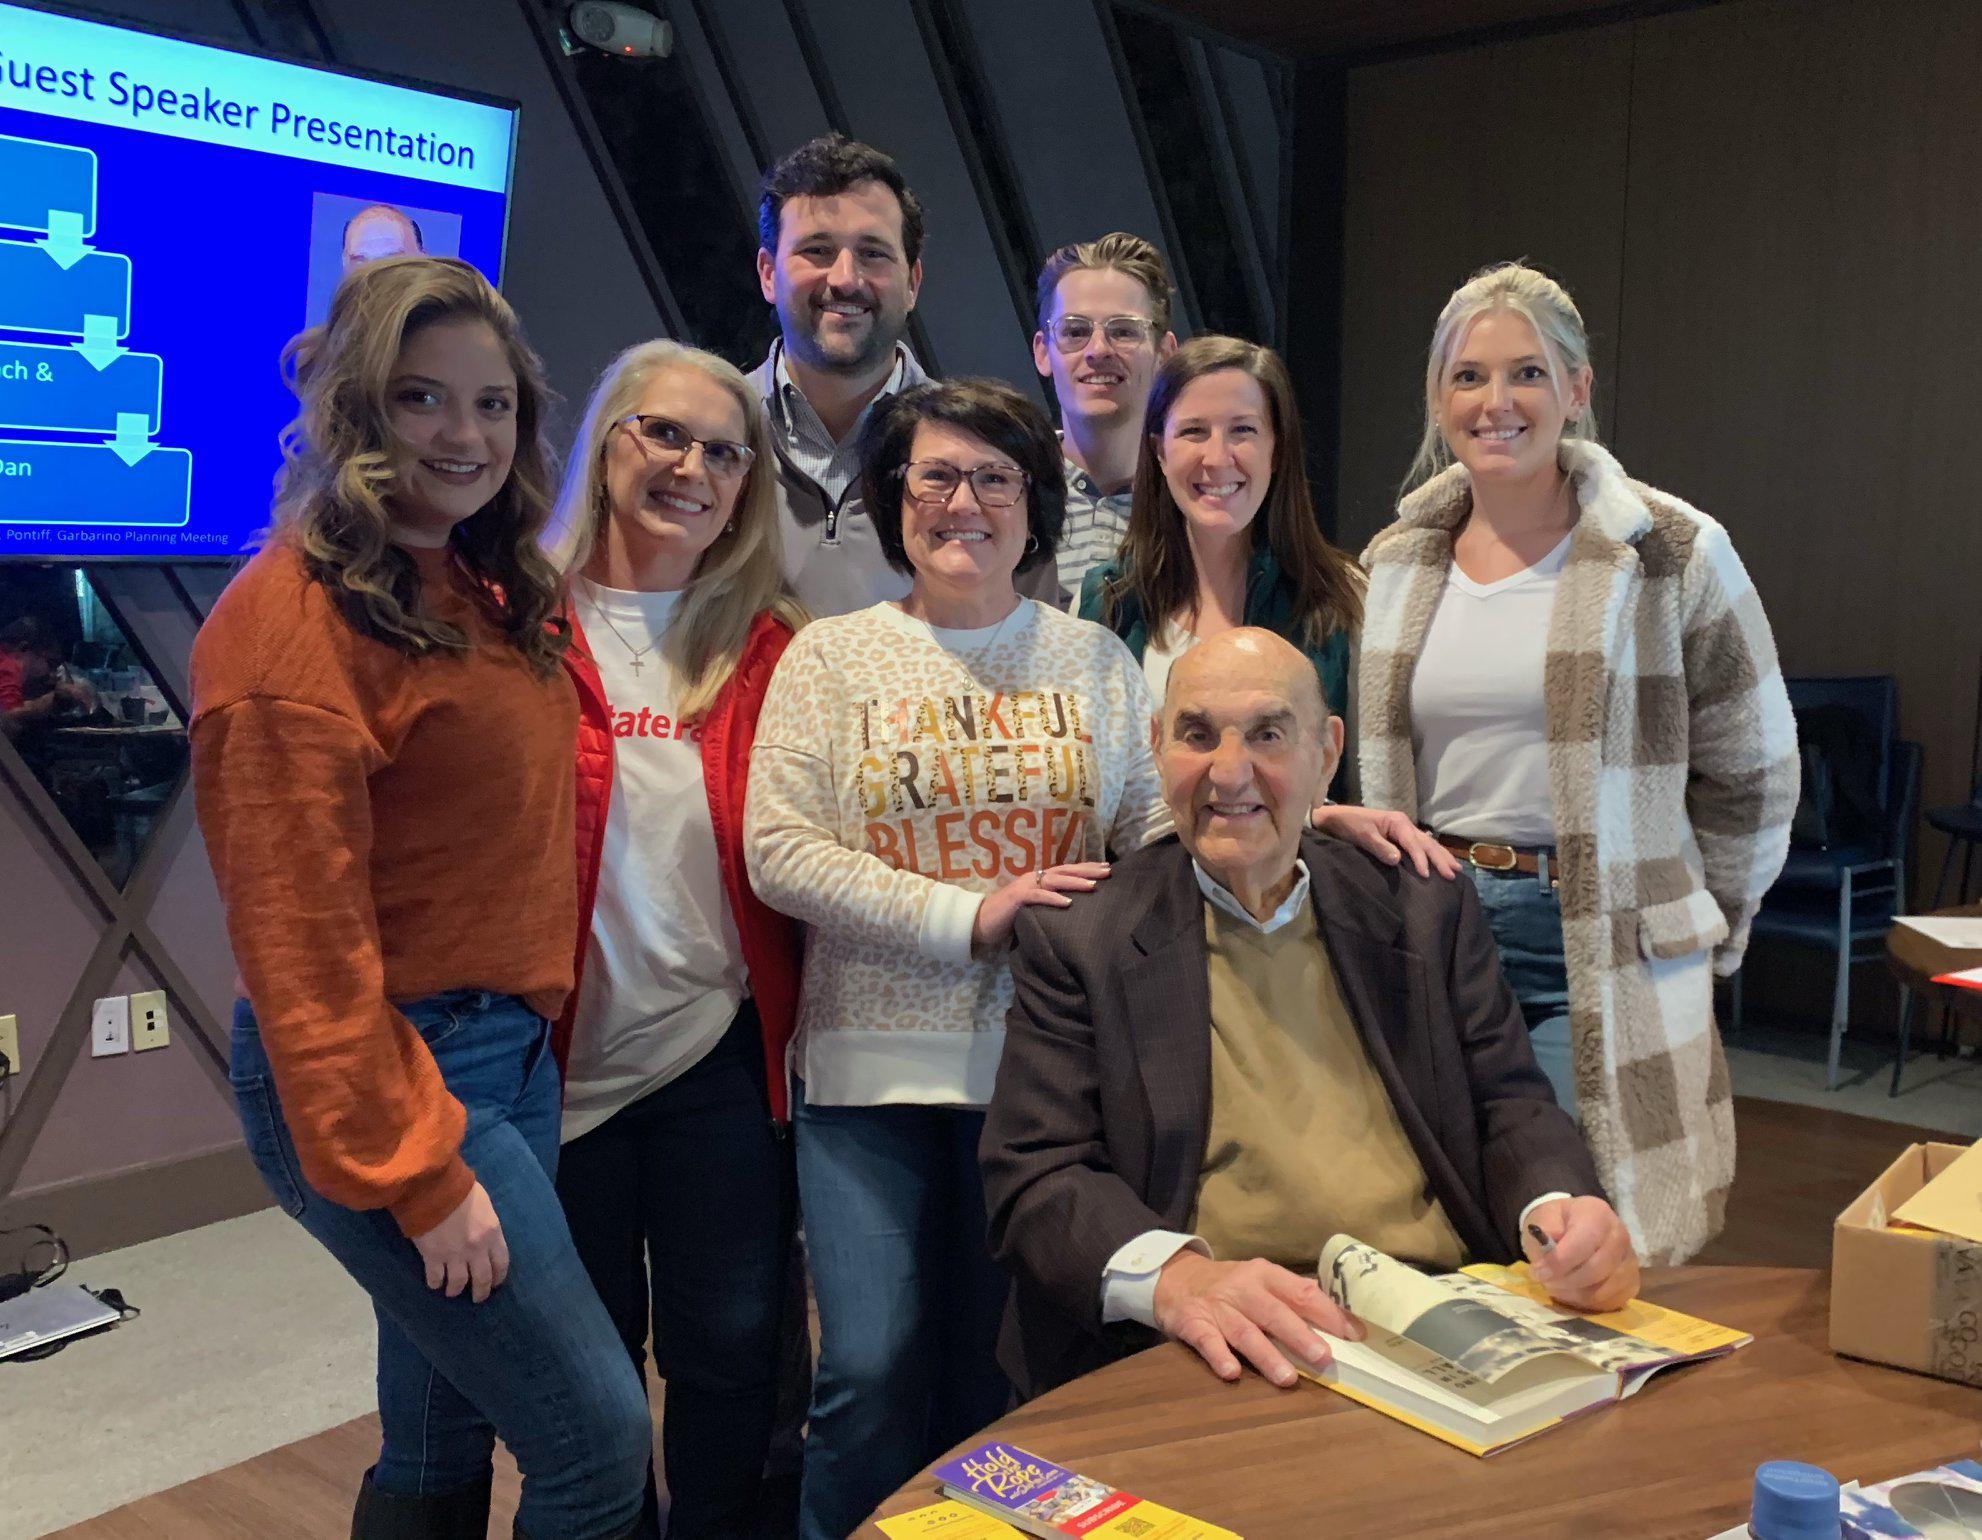 First ball game of the season calls for a throwback of our team with the legendary Skip Bertman! Ross Garbarino - State Farm Insurance Agent Baton Rouge (225)751-4840